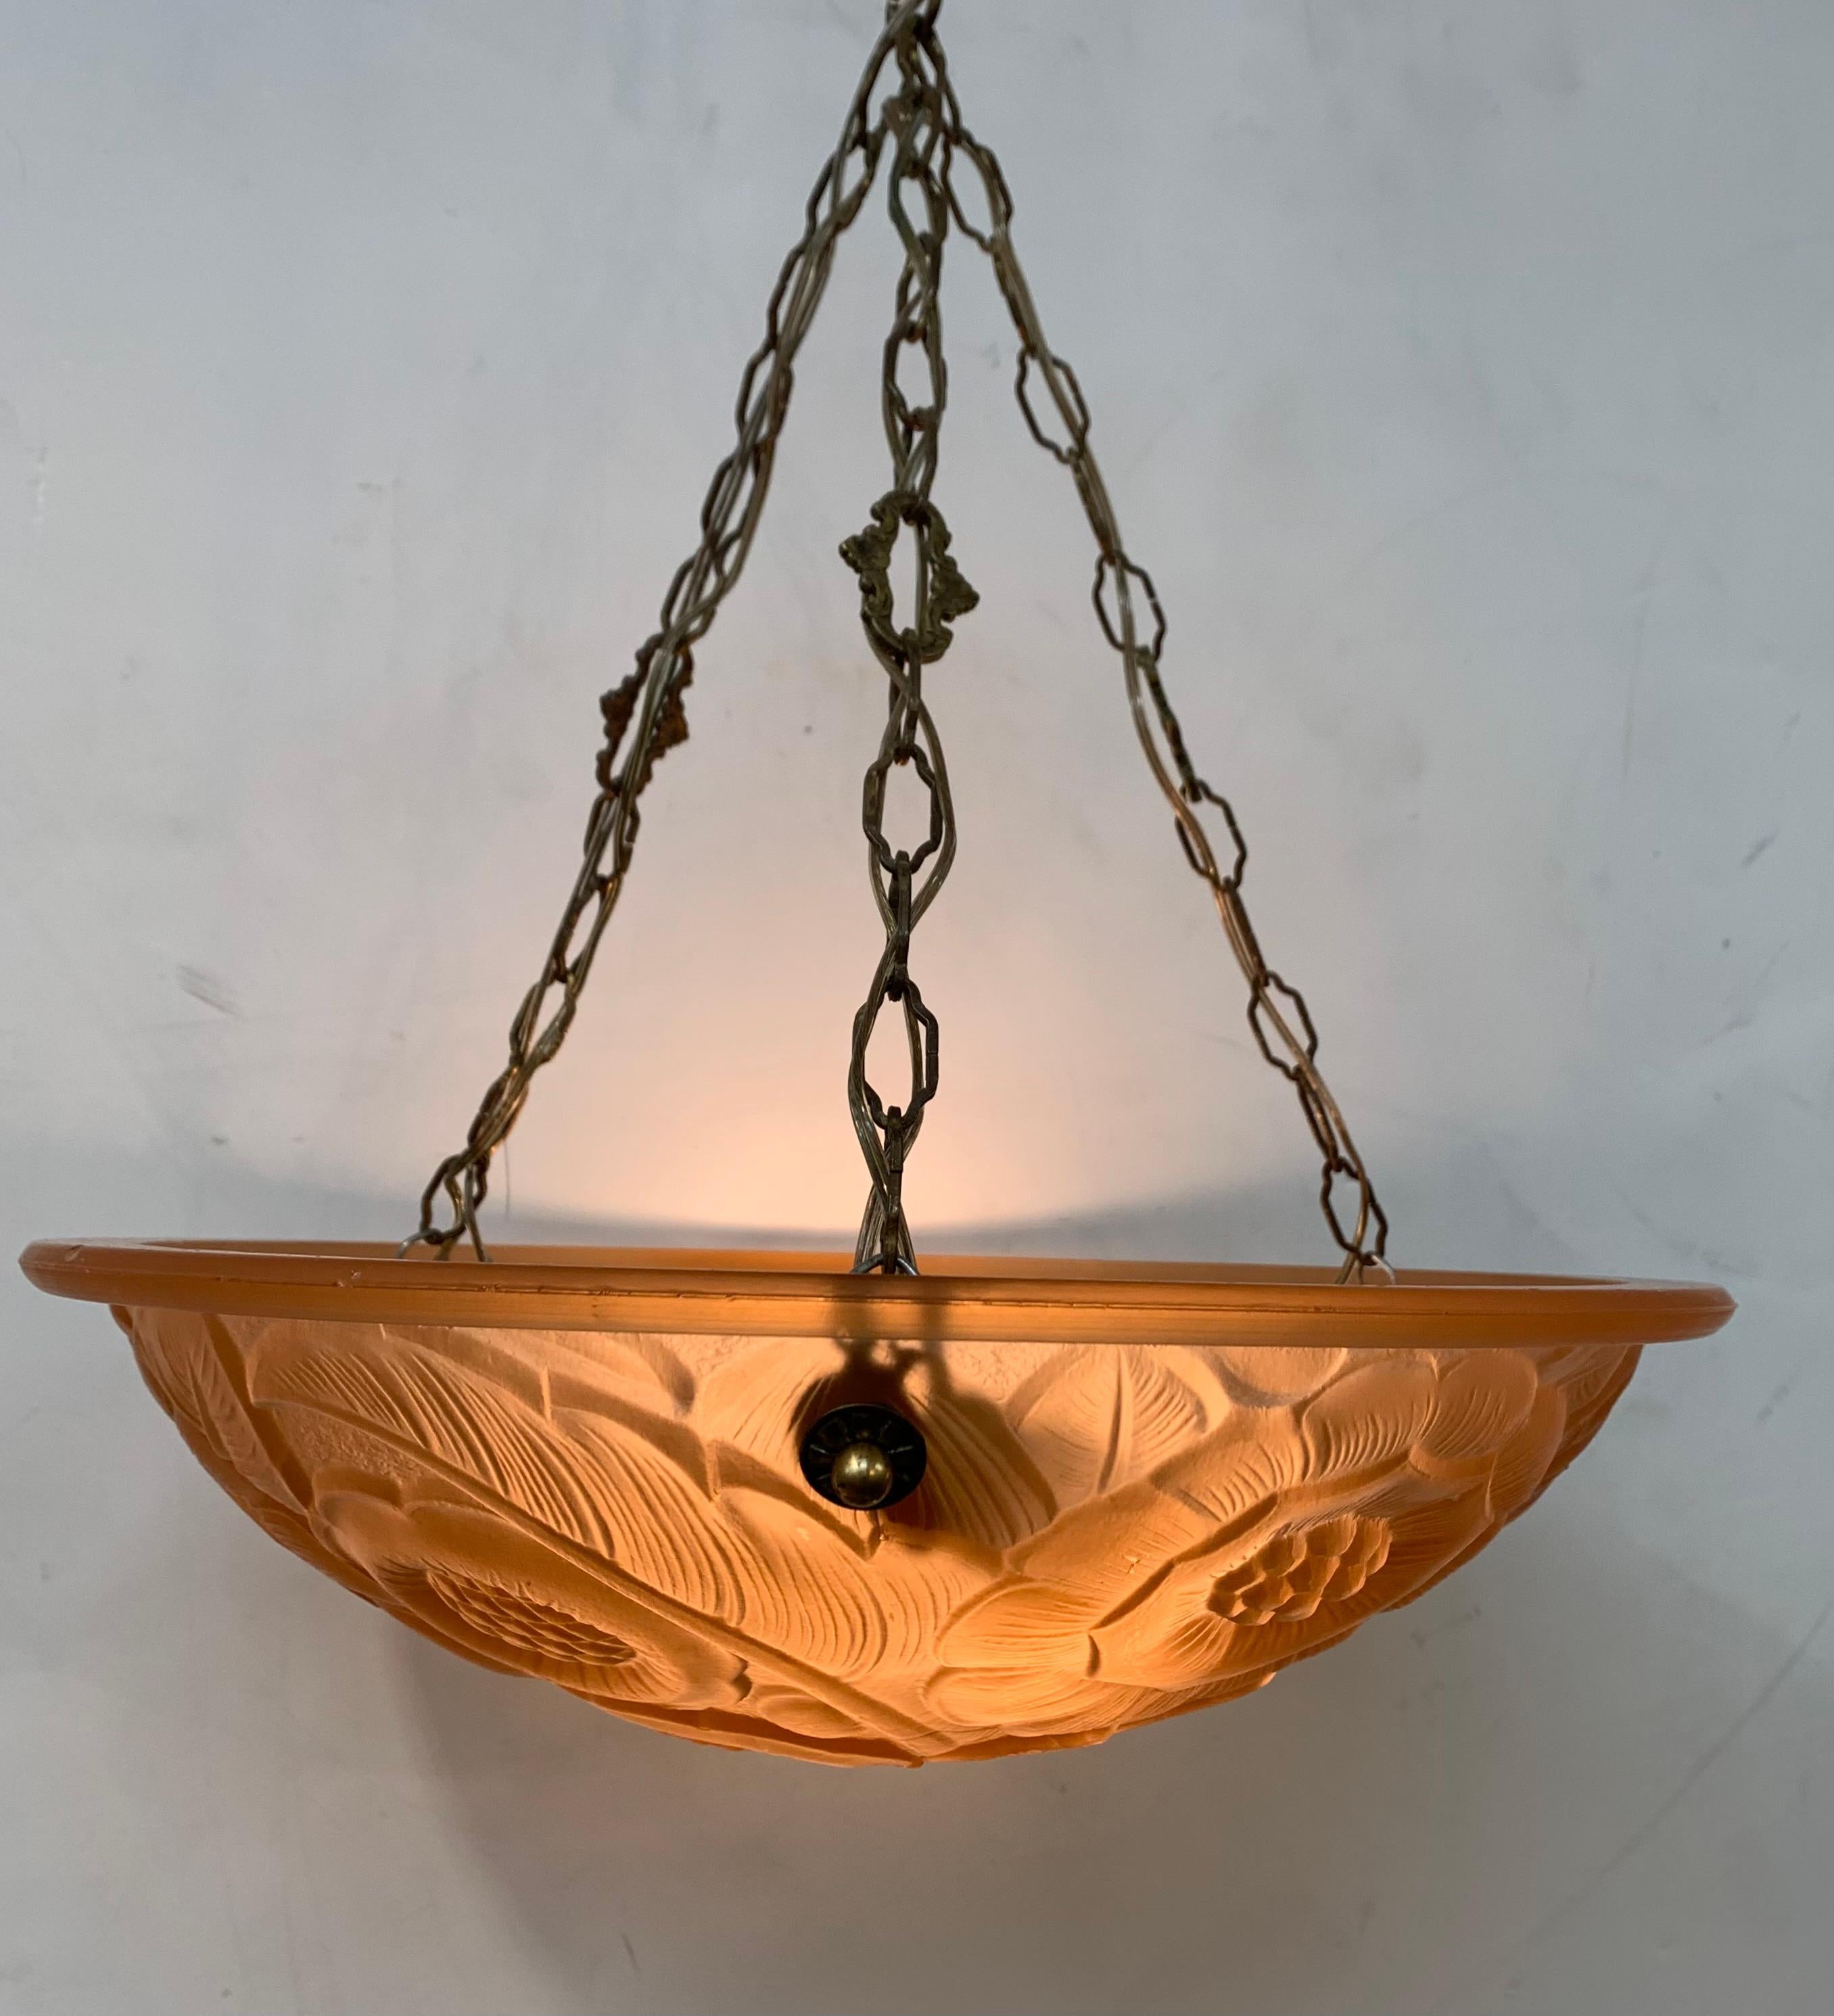 1930s Petitot salmon colored French glass bowl chandelier. Molded salmon colored glass shade is decorated in a floral pattern. Held by three (3) period brass chains and matching canopy. Fixture has been rewired to American standards with three (3)